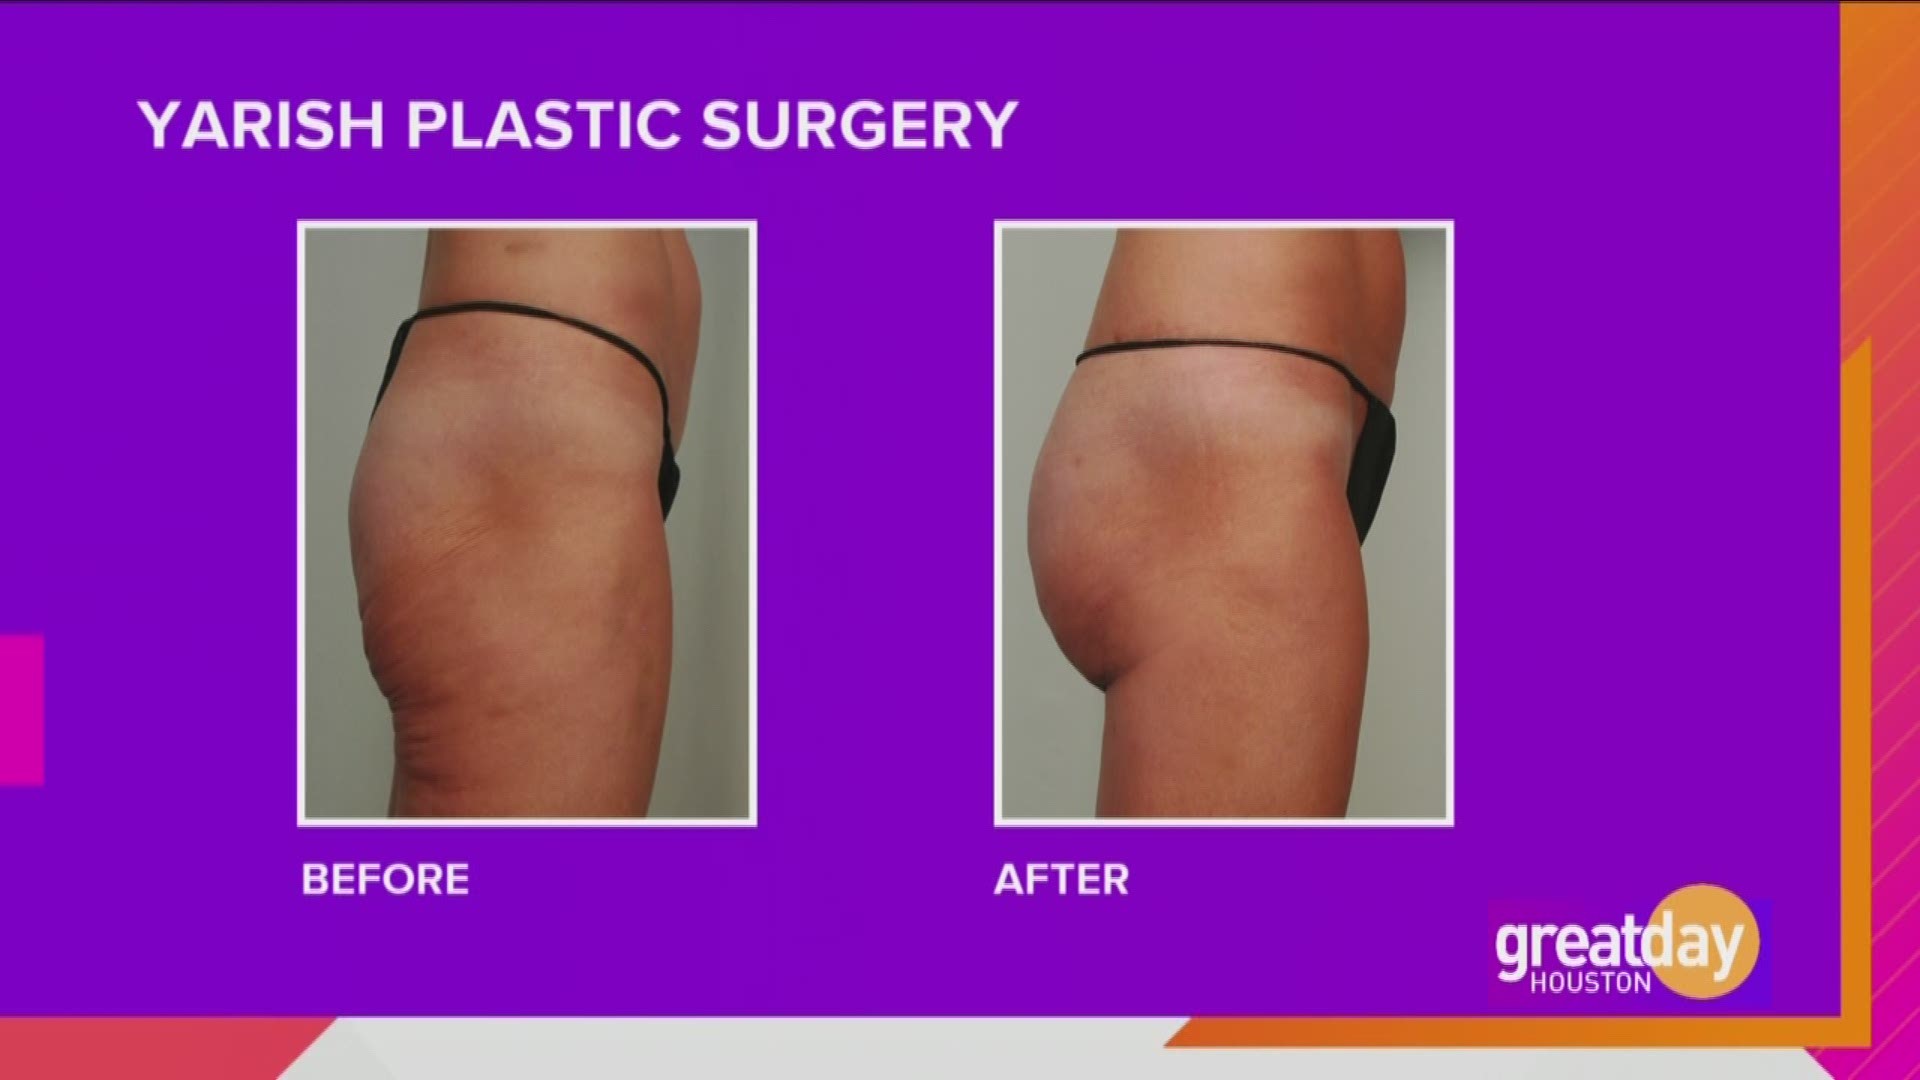 Improve your look with the help of Yarish Plastic Surgery.